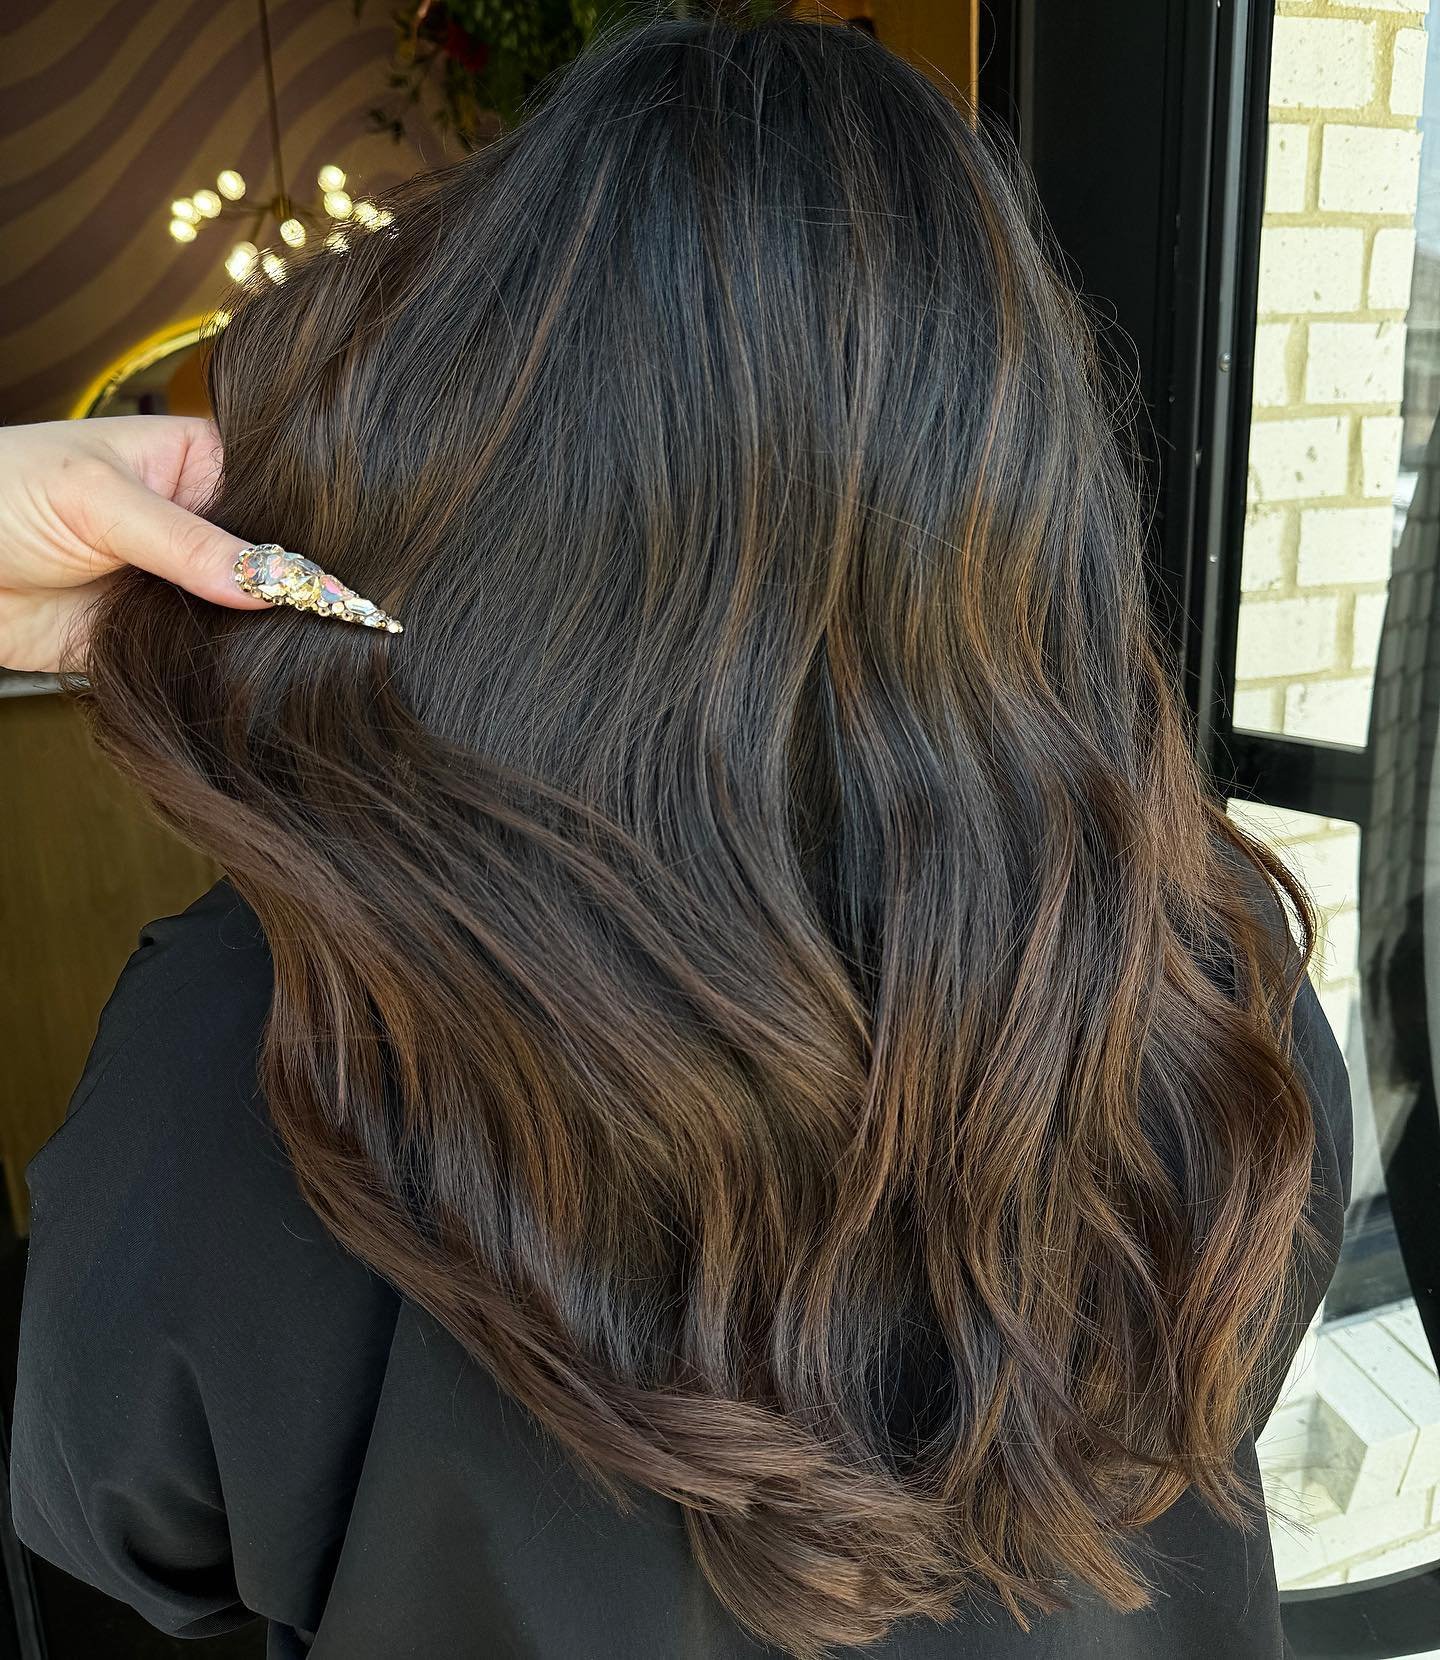 Taking over dallas one balayage at a time ʚɞ
&bull;
 
&bull;
swipe to see the before 🙈 

📸-@traceyhairstyles ʚɞ 

 

#dfwhairstylist #dfwhairsalon #fypシ #carroltontx #balayage #healthyhairjourney